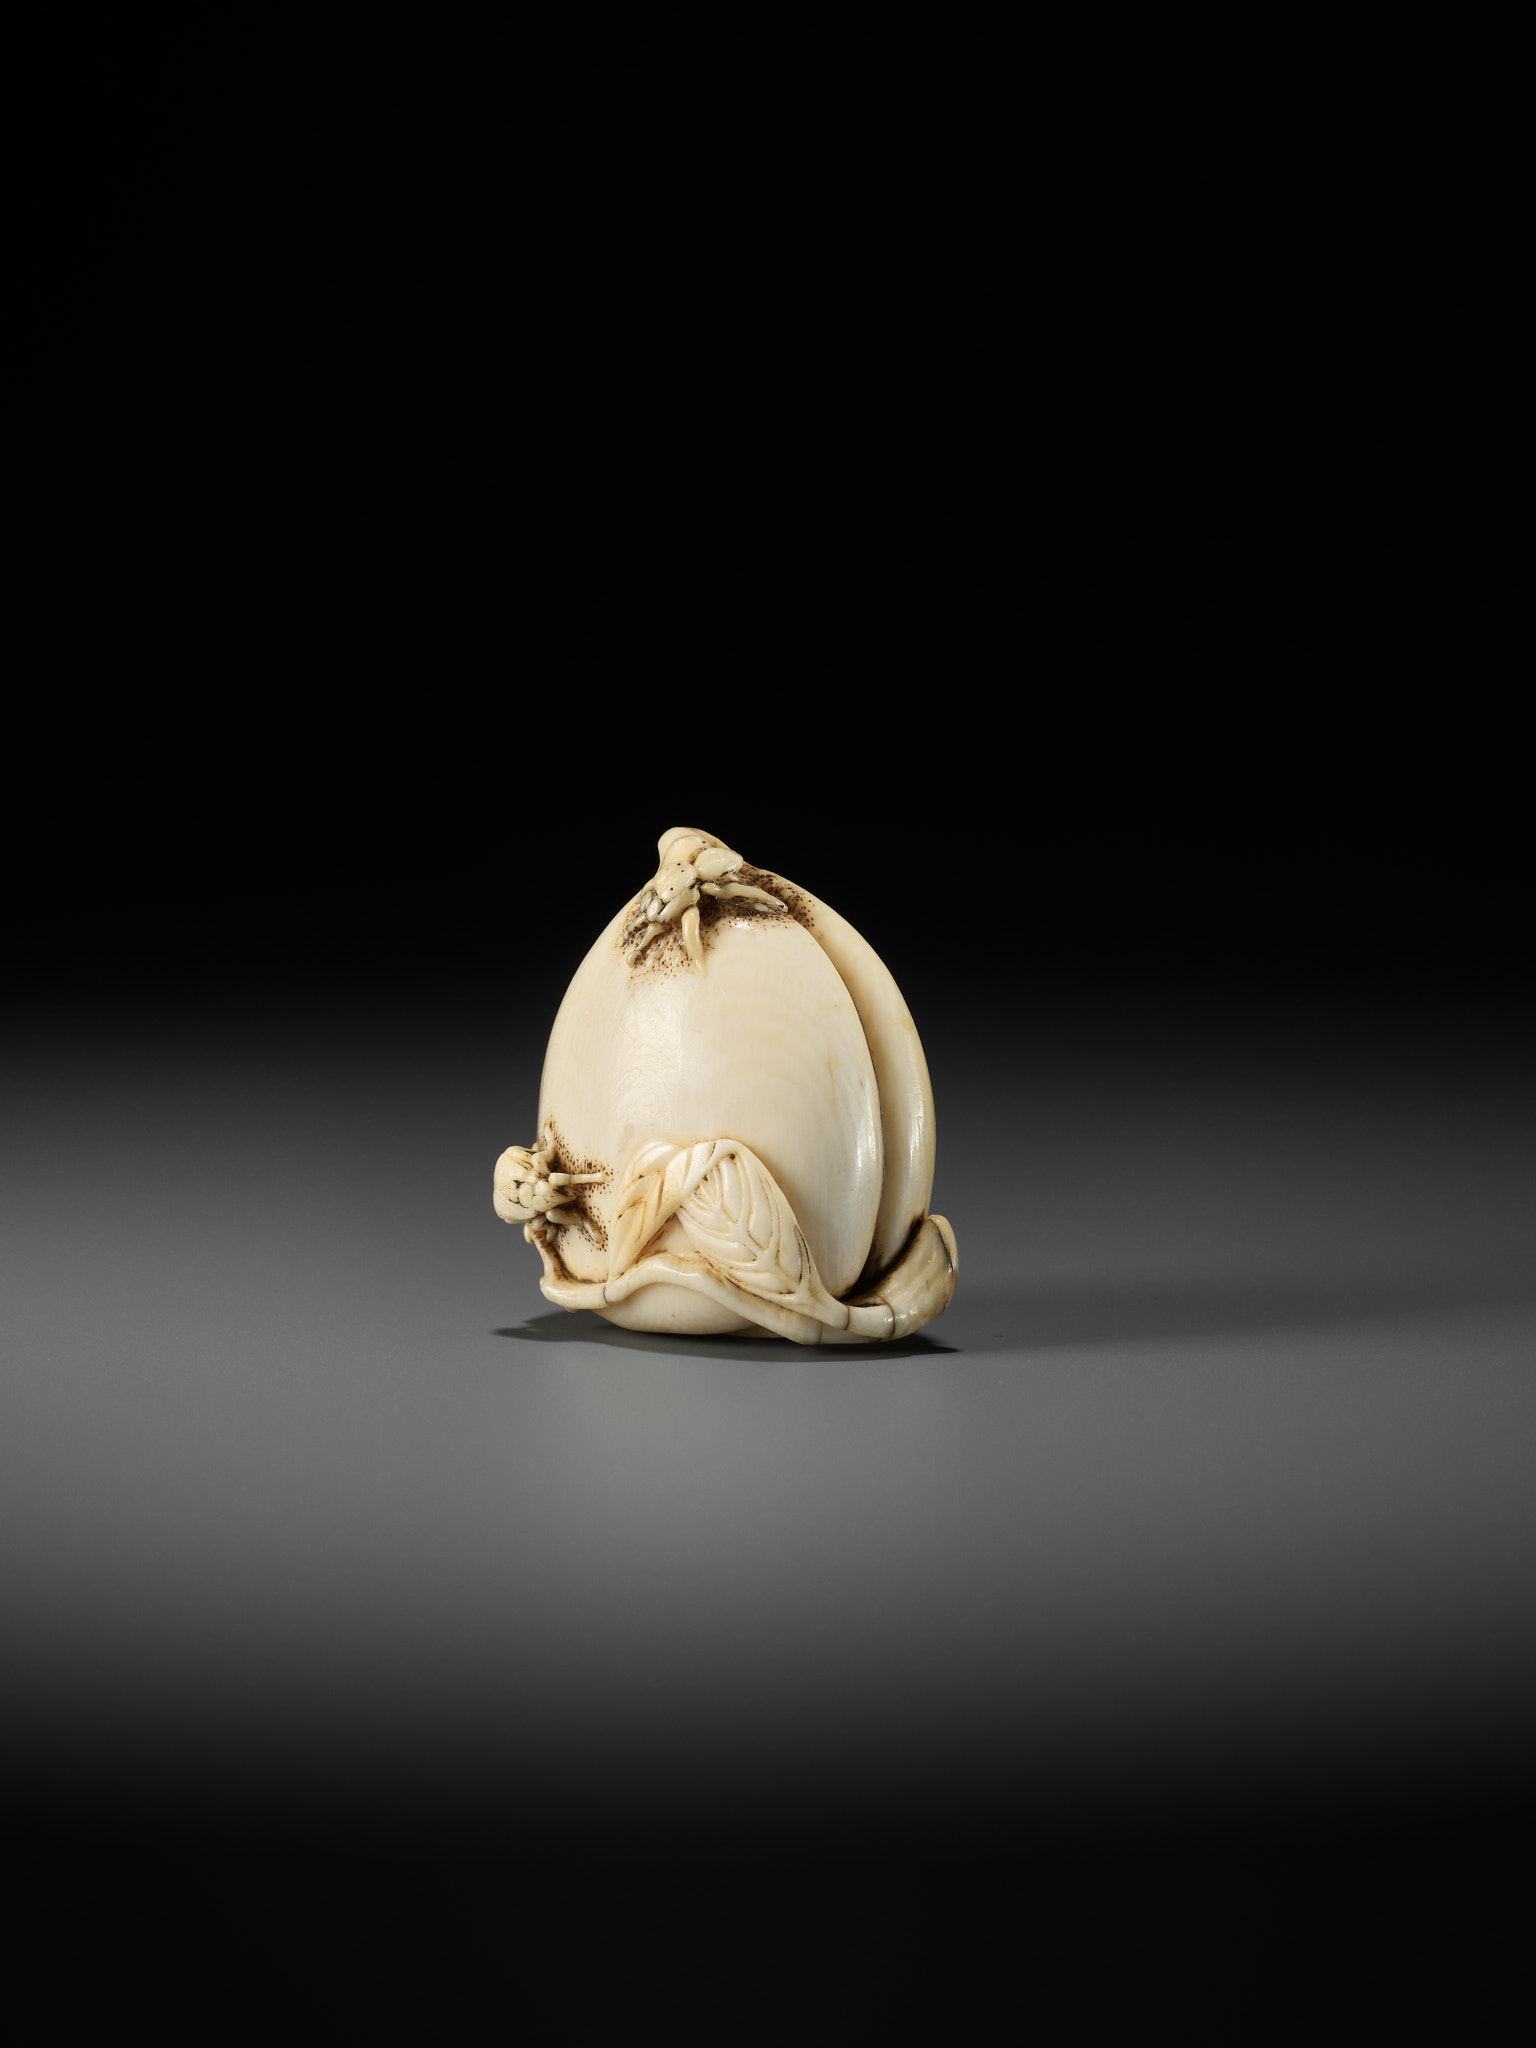 AN IVORY NETSUKE OF A PEACH WITH INSECTS - Image 3 of 10